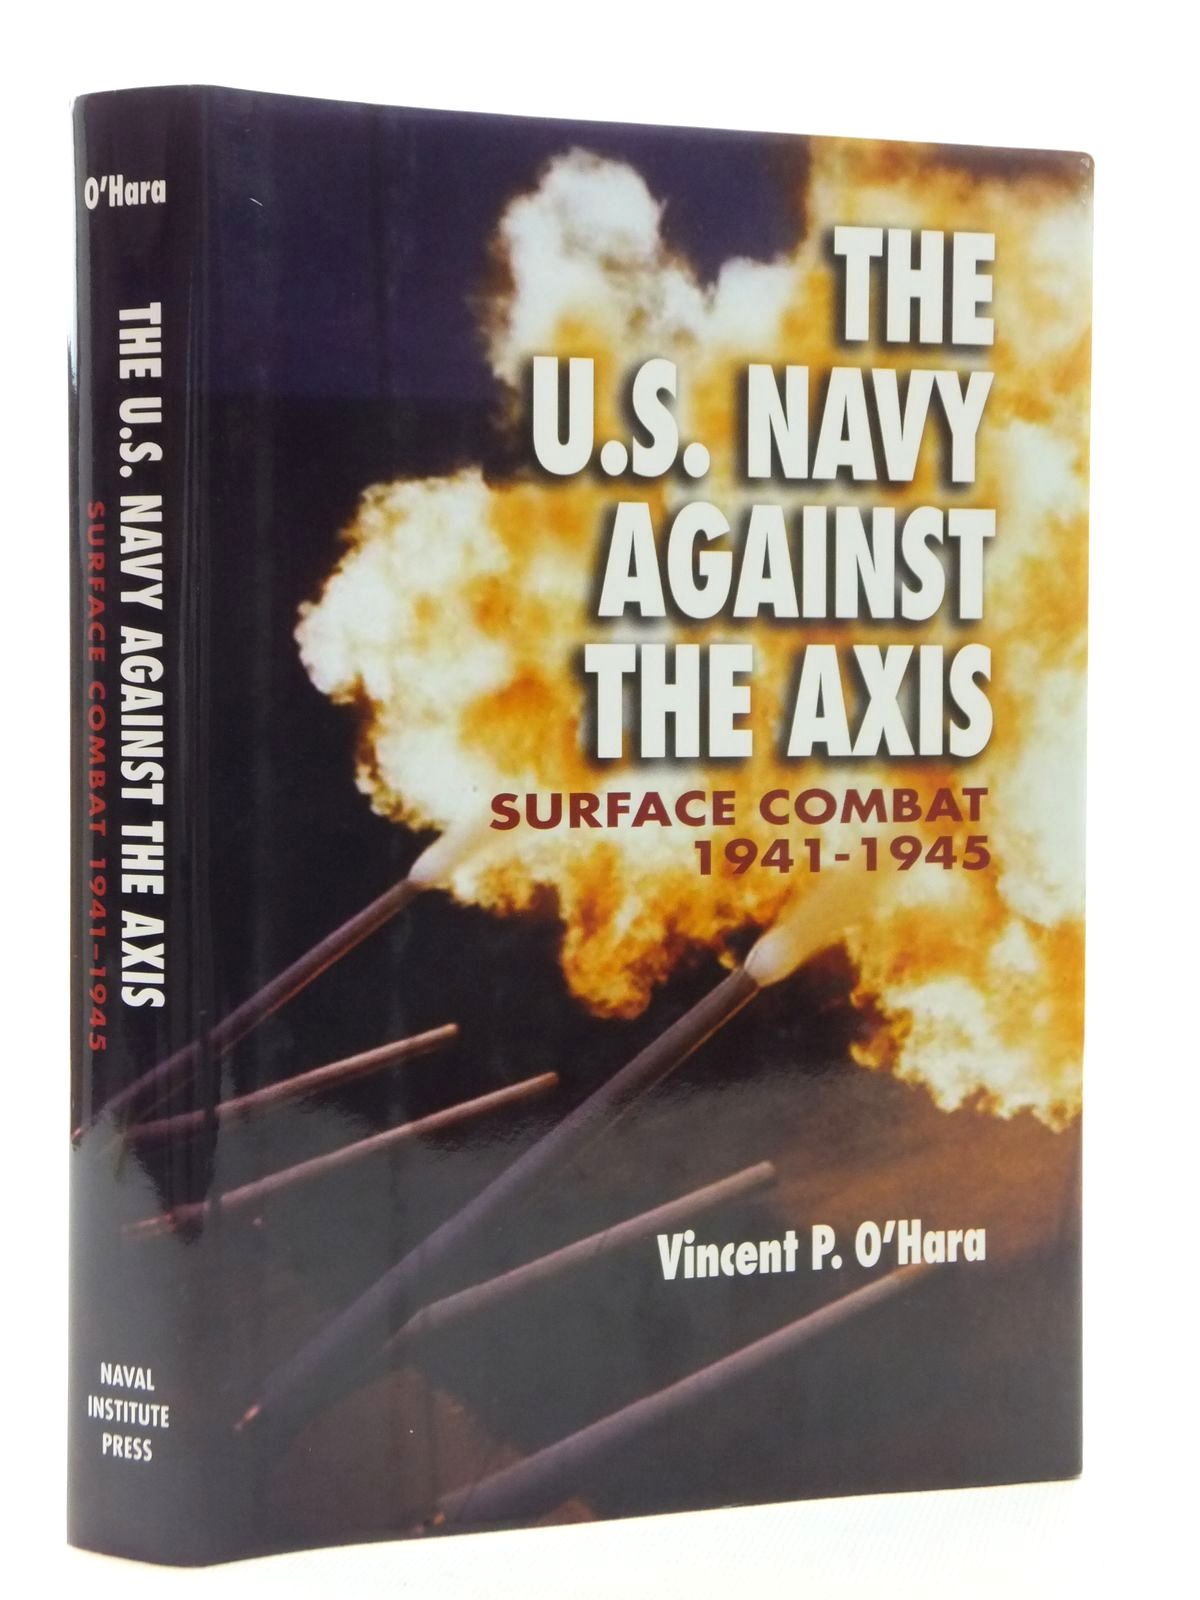 Photo of THE U.S. NAVY AGAINST THE AXIS: SURFACE COMBAT 1941-1945 written by O'Hara, Vincent P. published by Naval Institute Press (STOCK CODE: 1815163)  for sale by Stella & Rose's Books